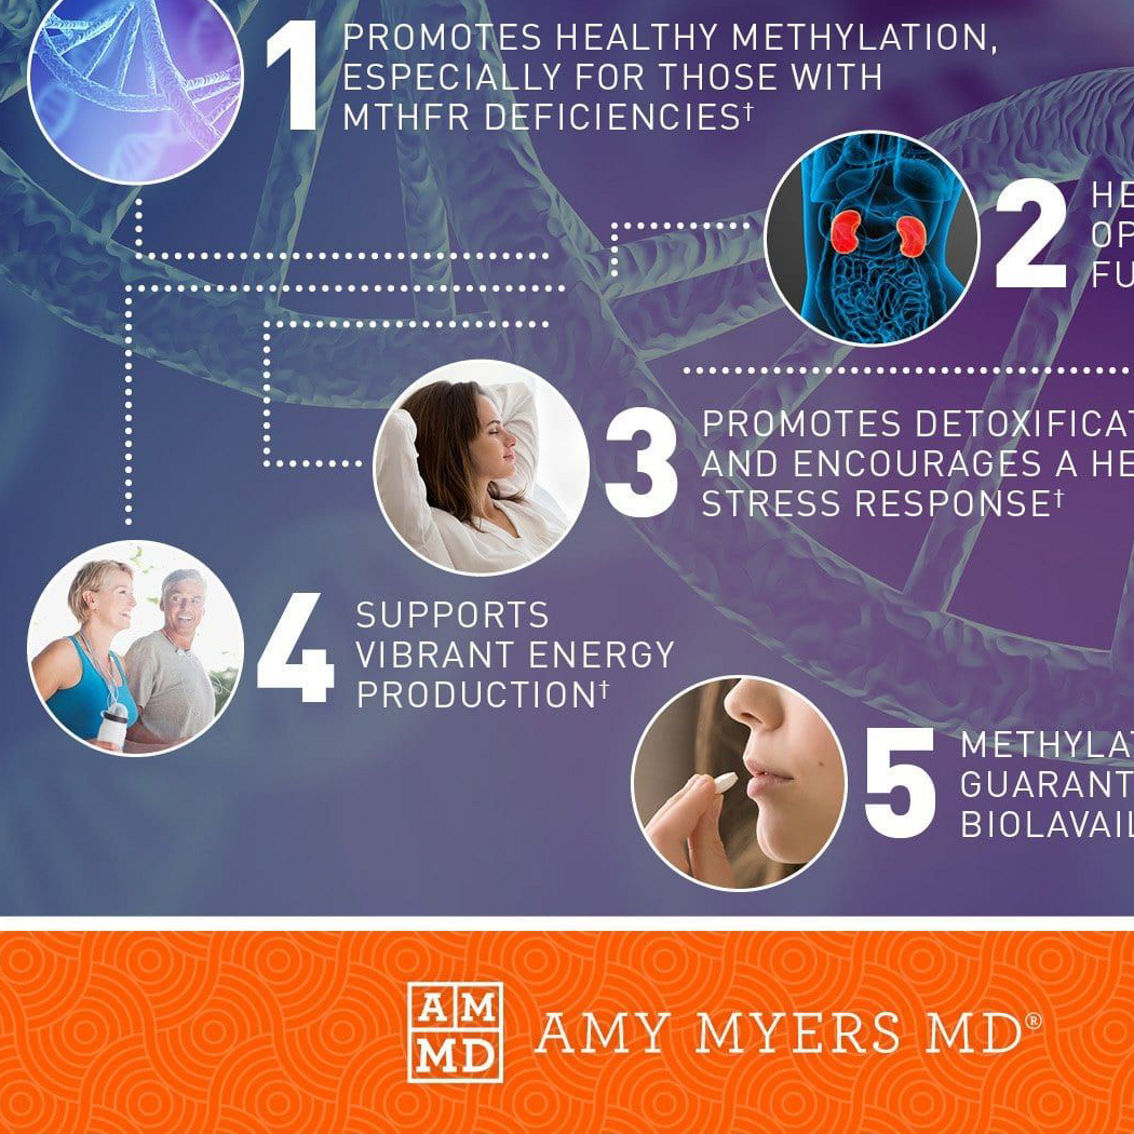 Amy Myers MD Methylation Support® - Image 2 of 2